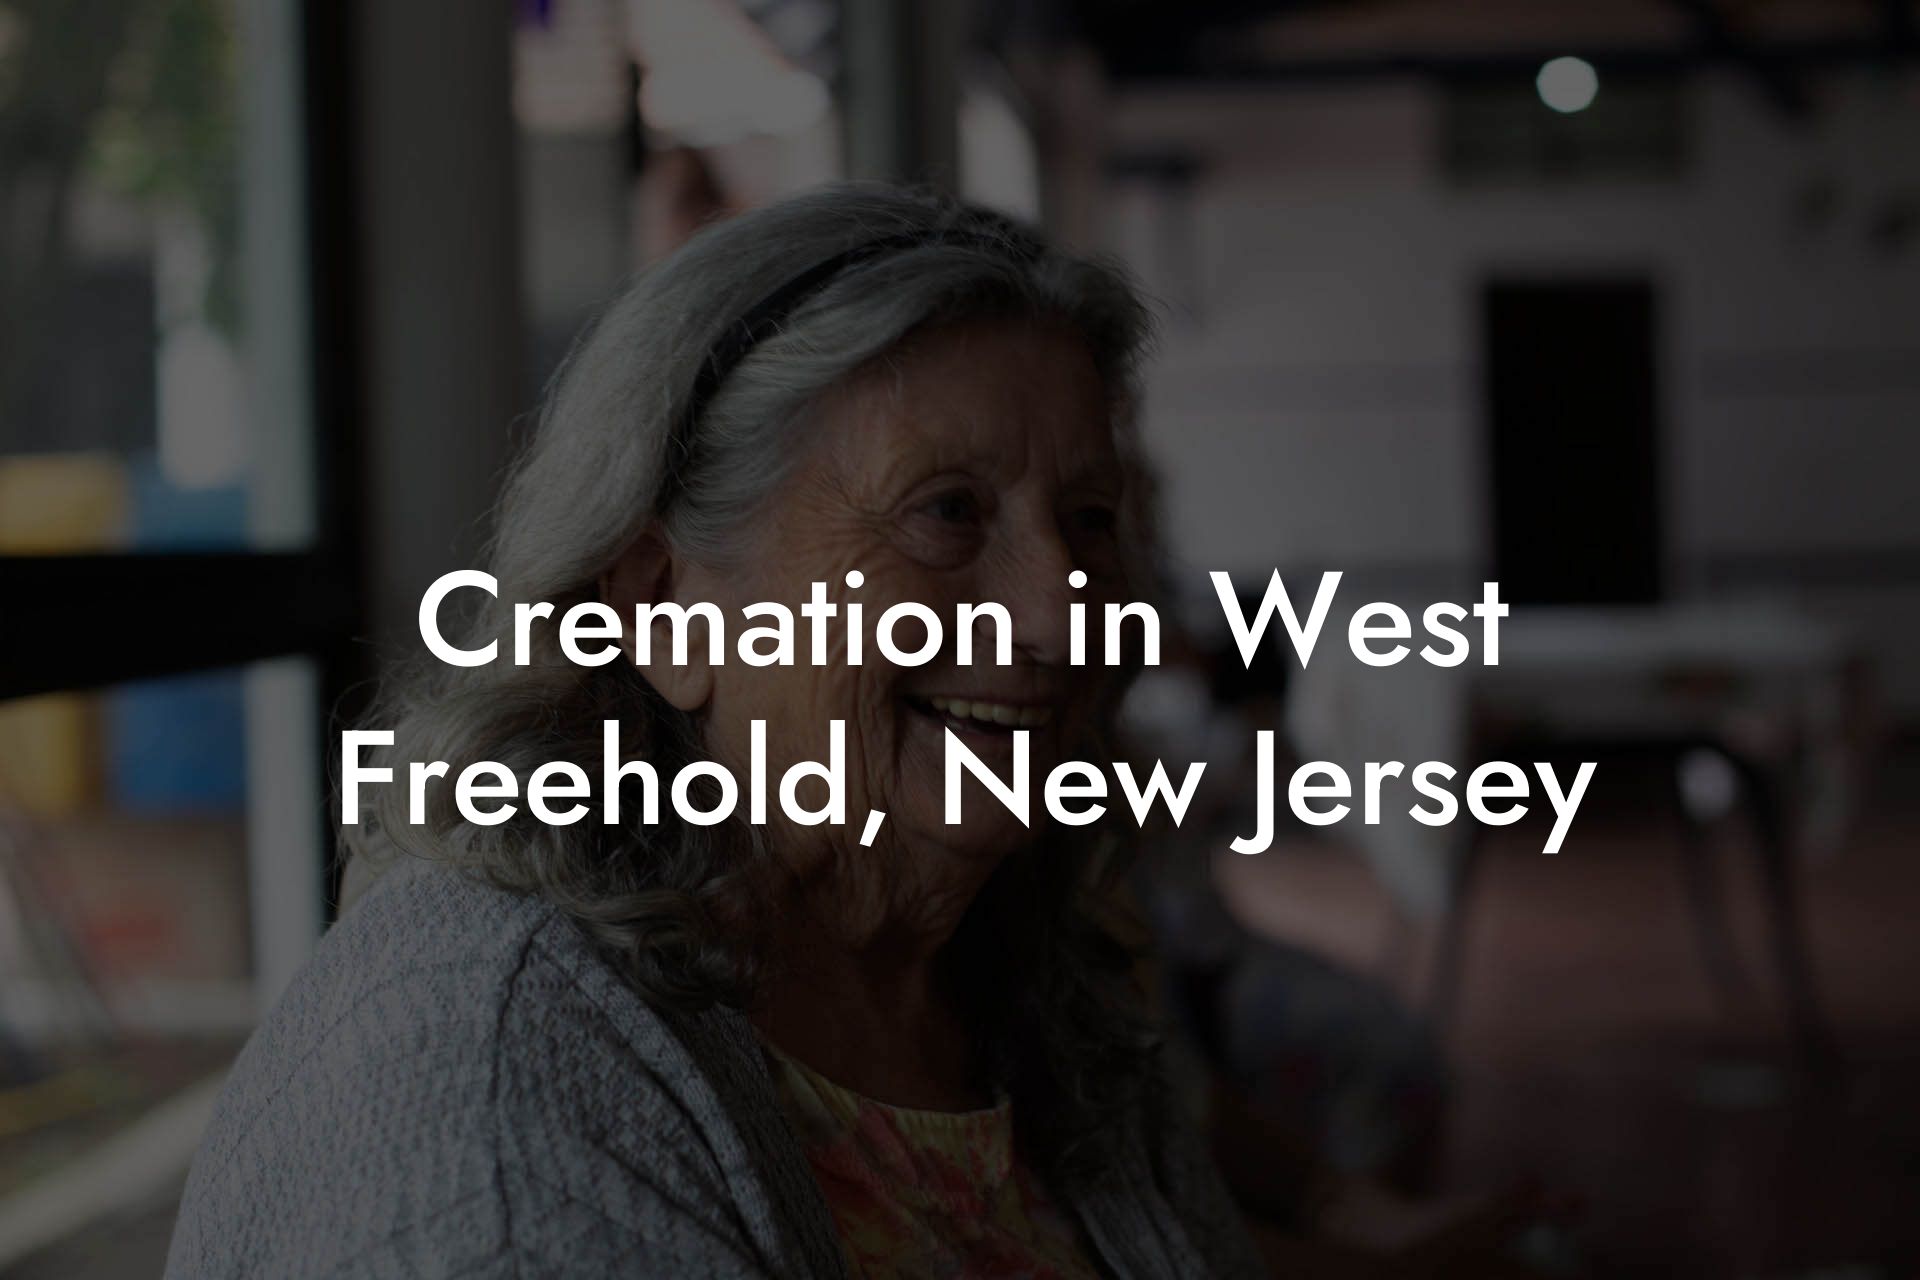 Cremation in West Freehold, New Jersey